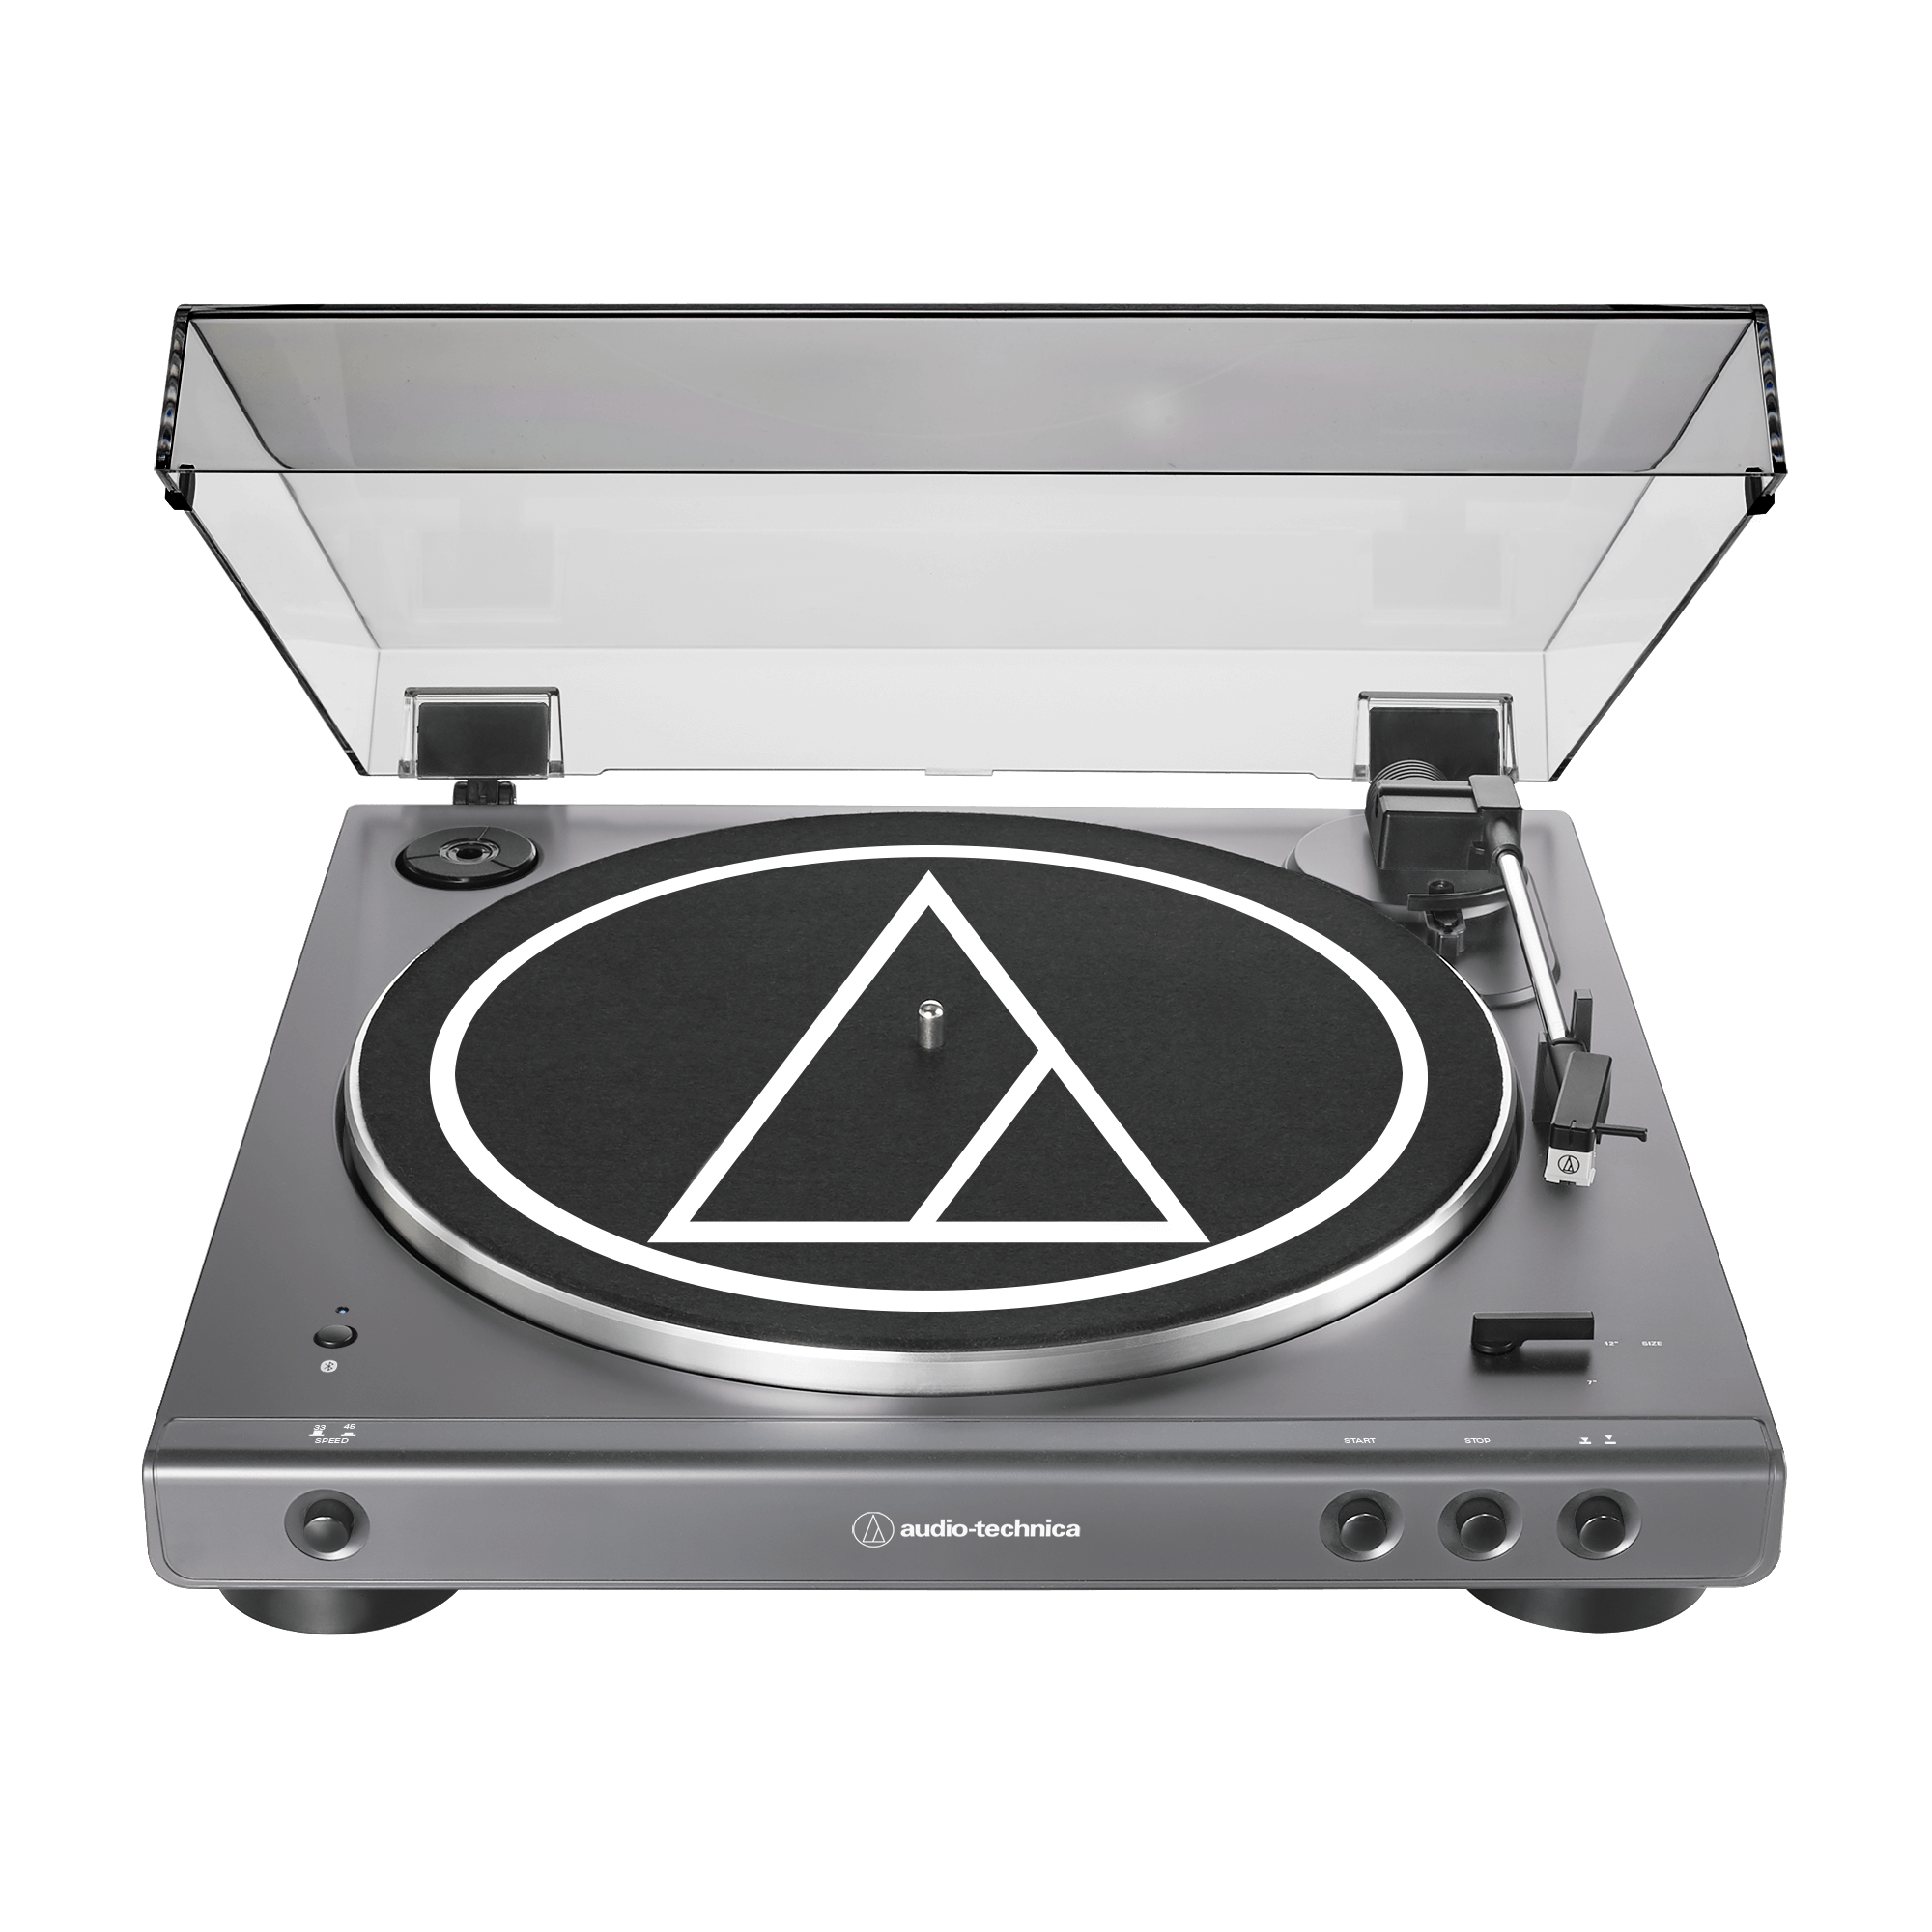 Audio-Technica's new turntable puts a modern spin on an old classic